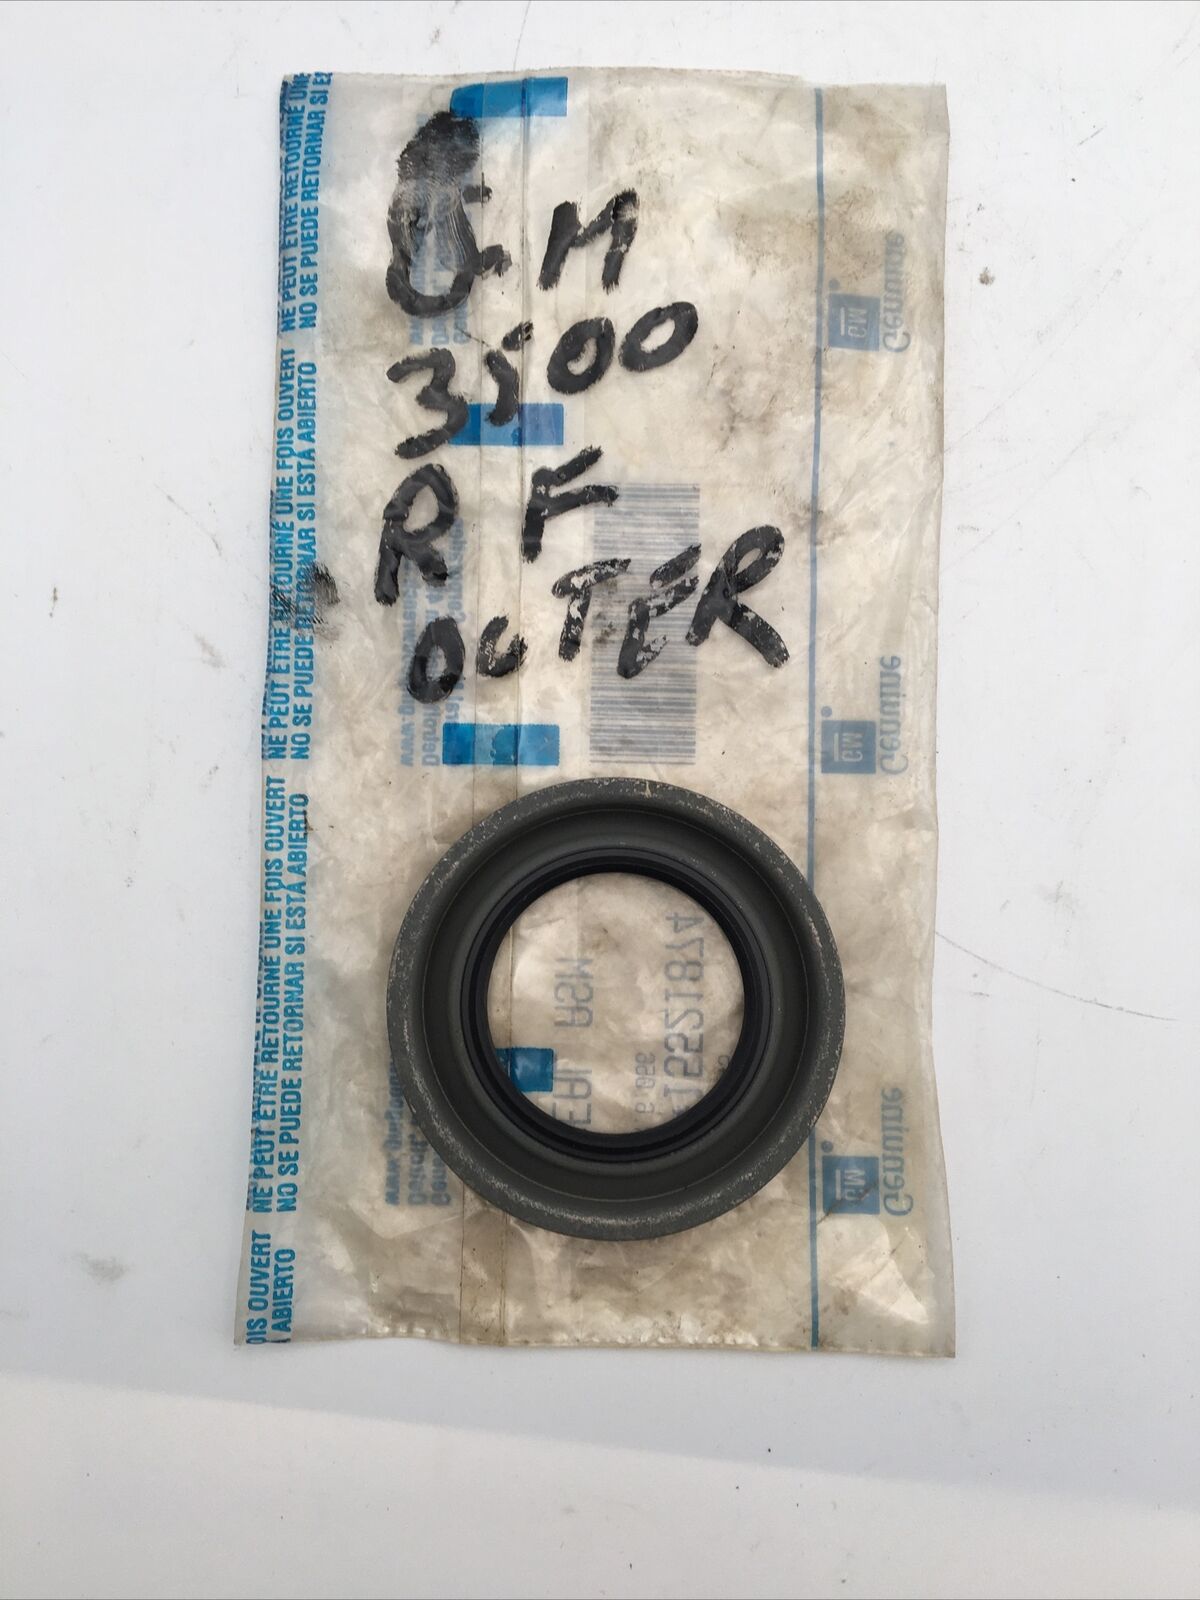 GM 15521874 Front Axle Output Shaft Seal - New Old Stock